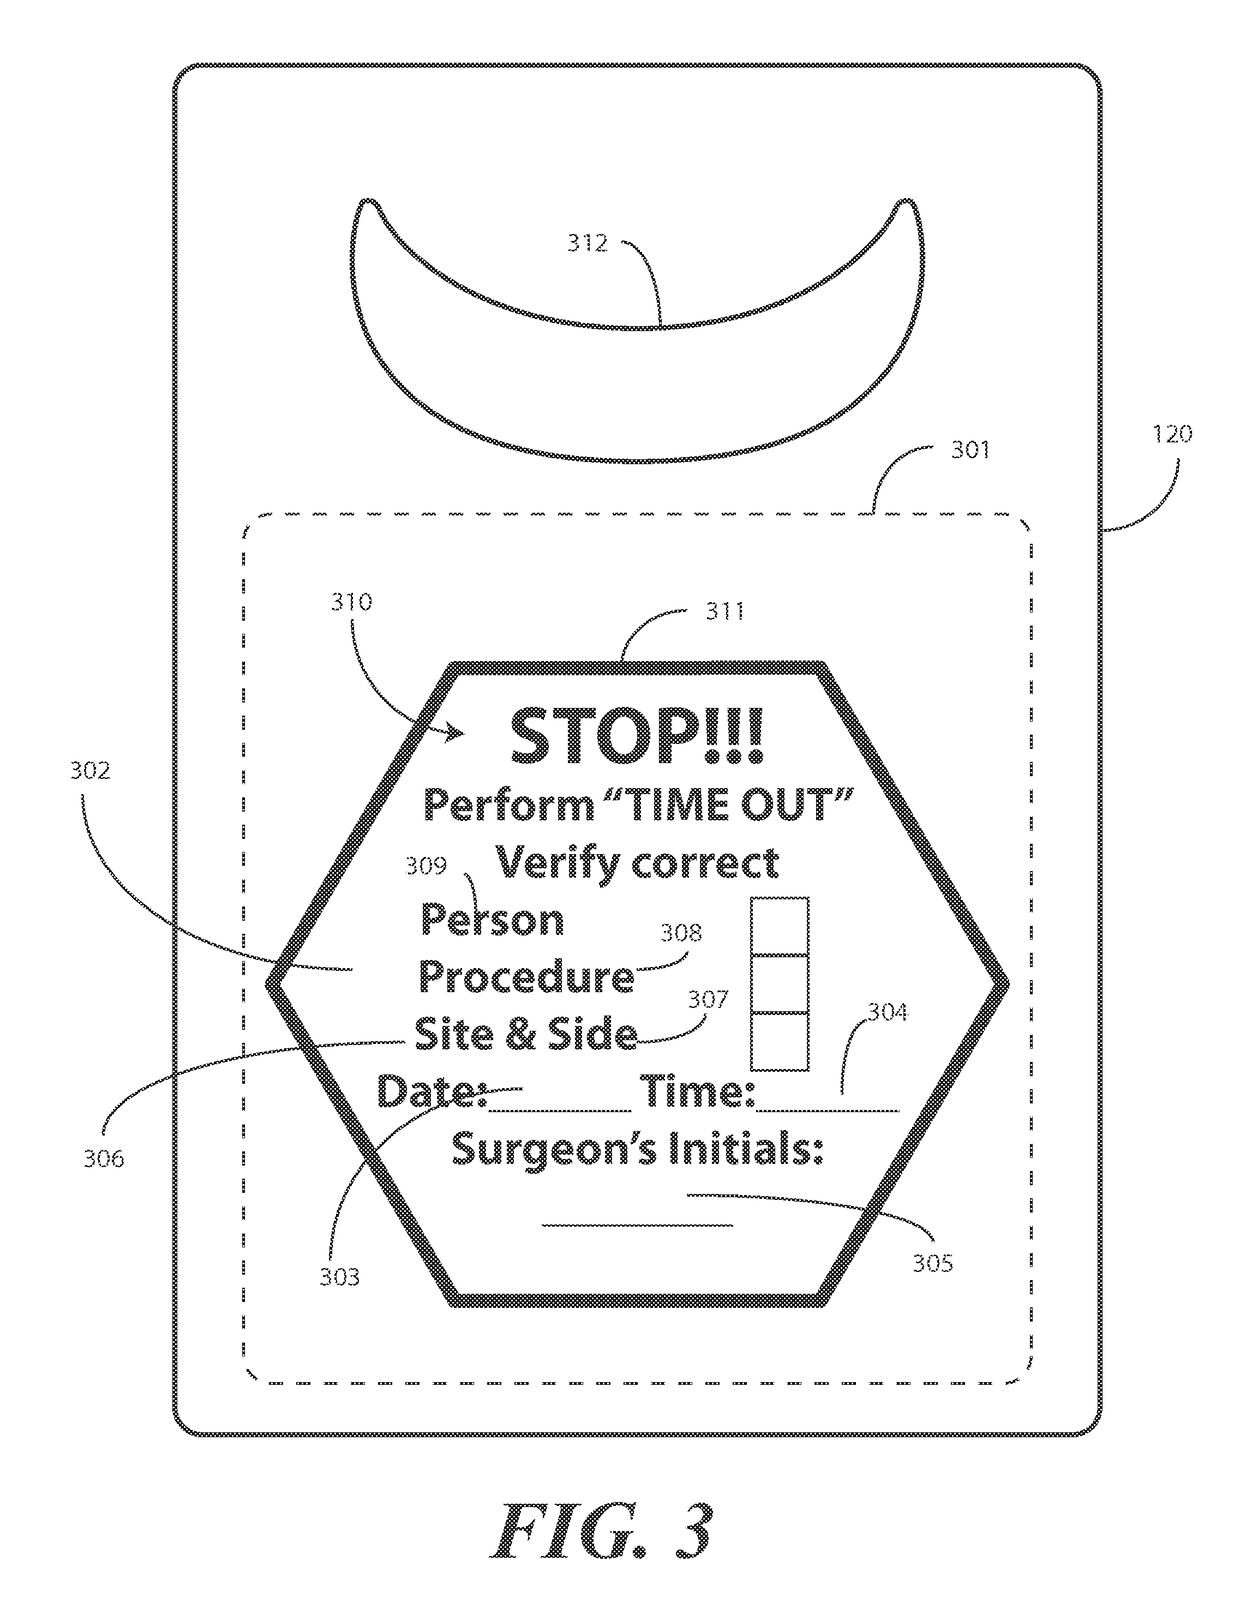 Surgical gown configured for prevention of improper medical procedures